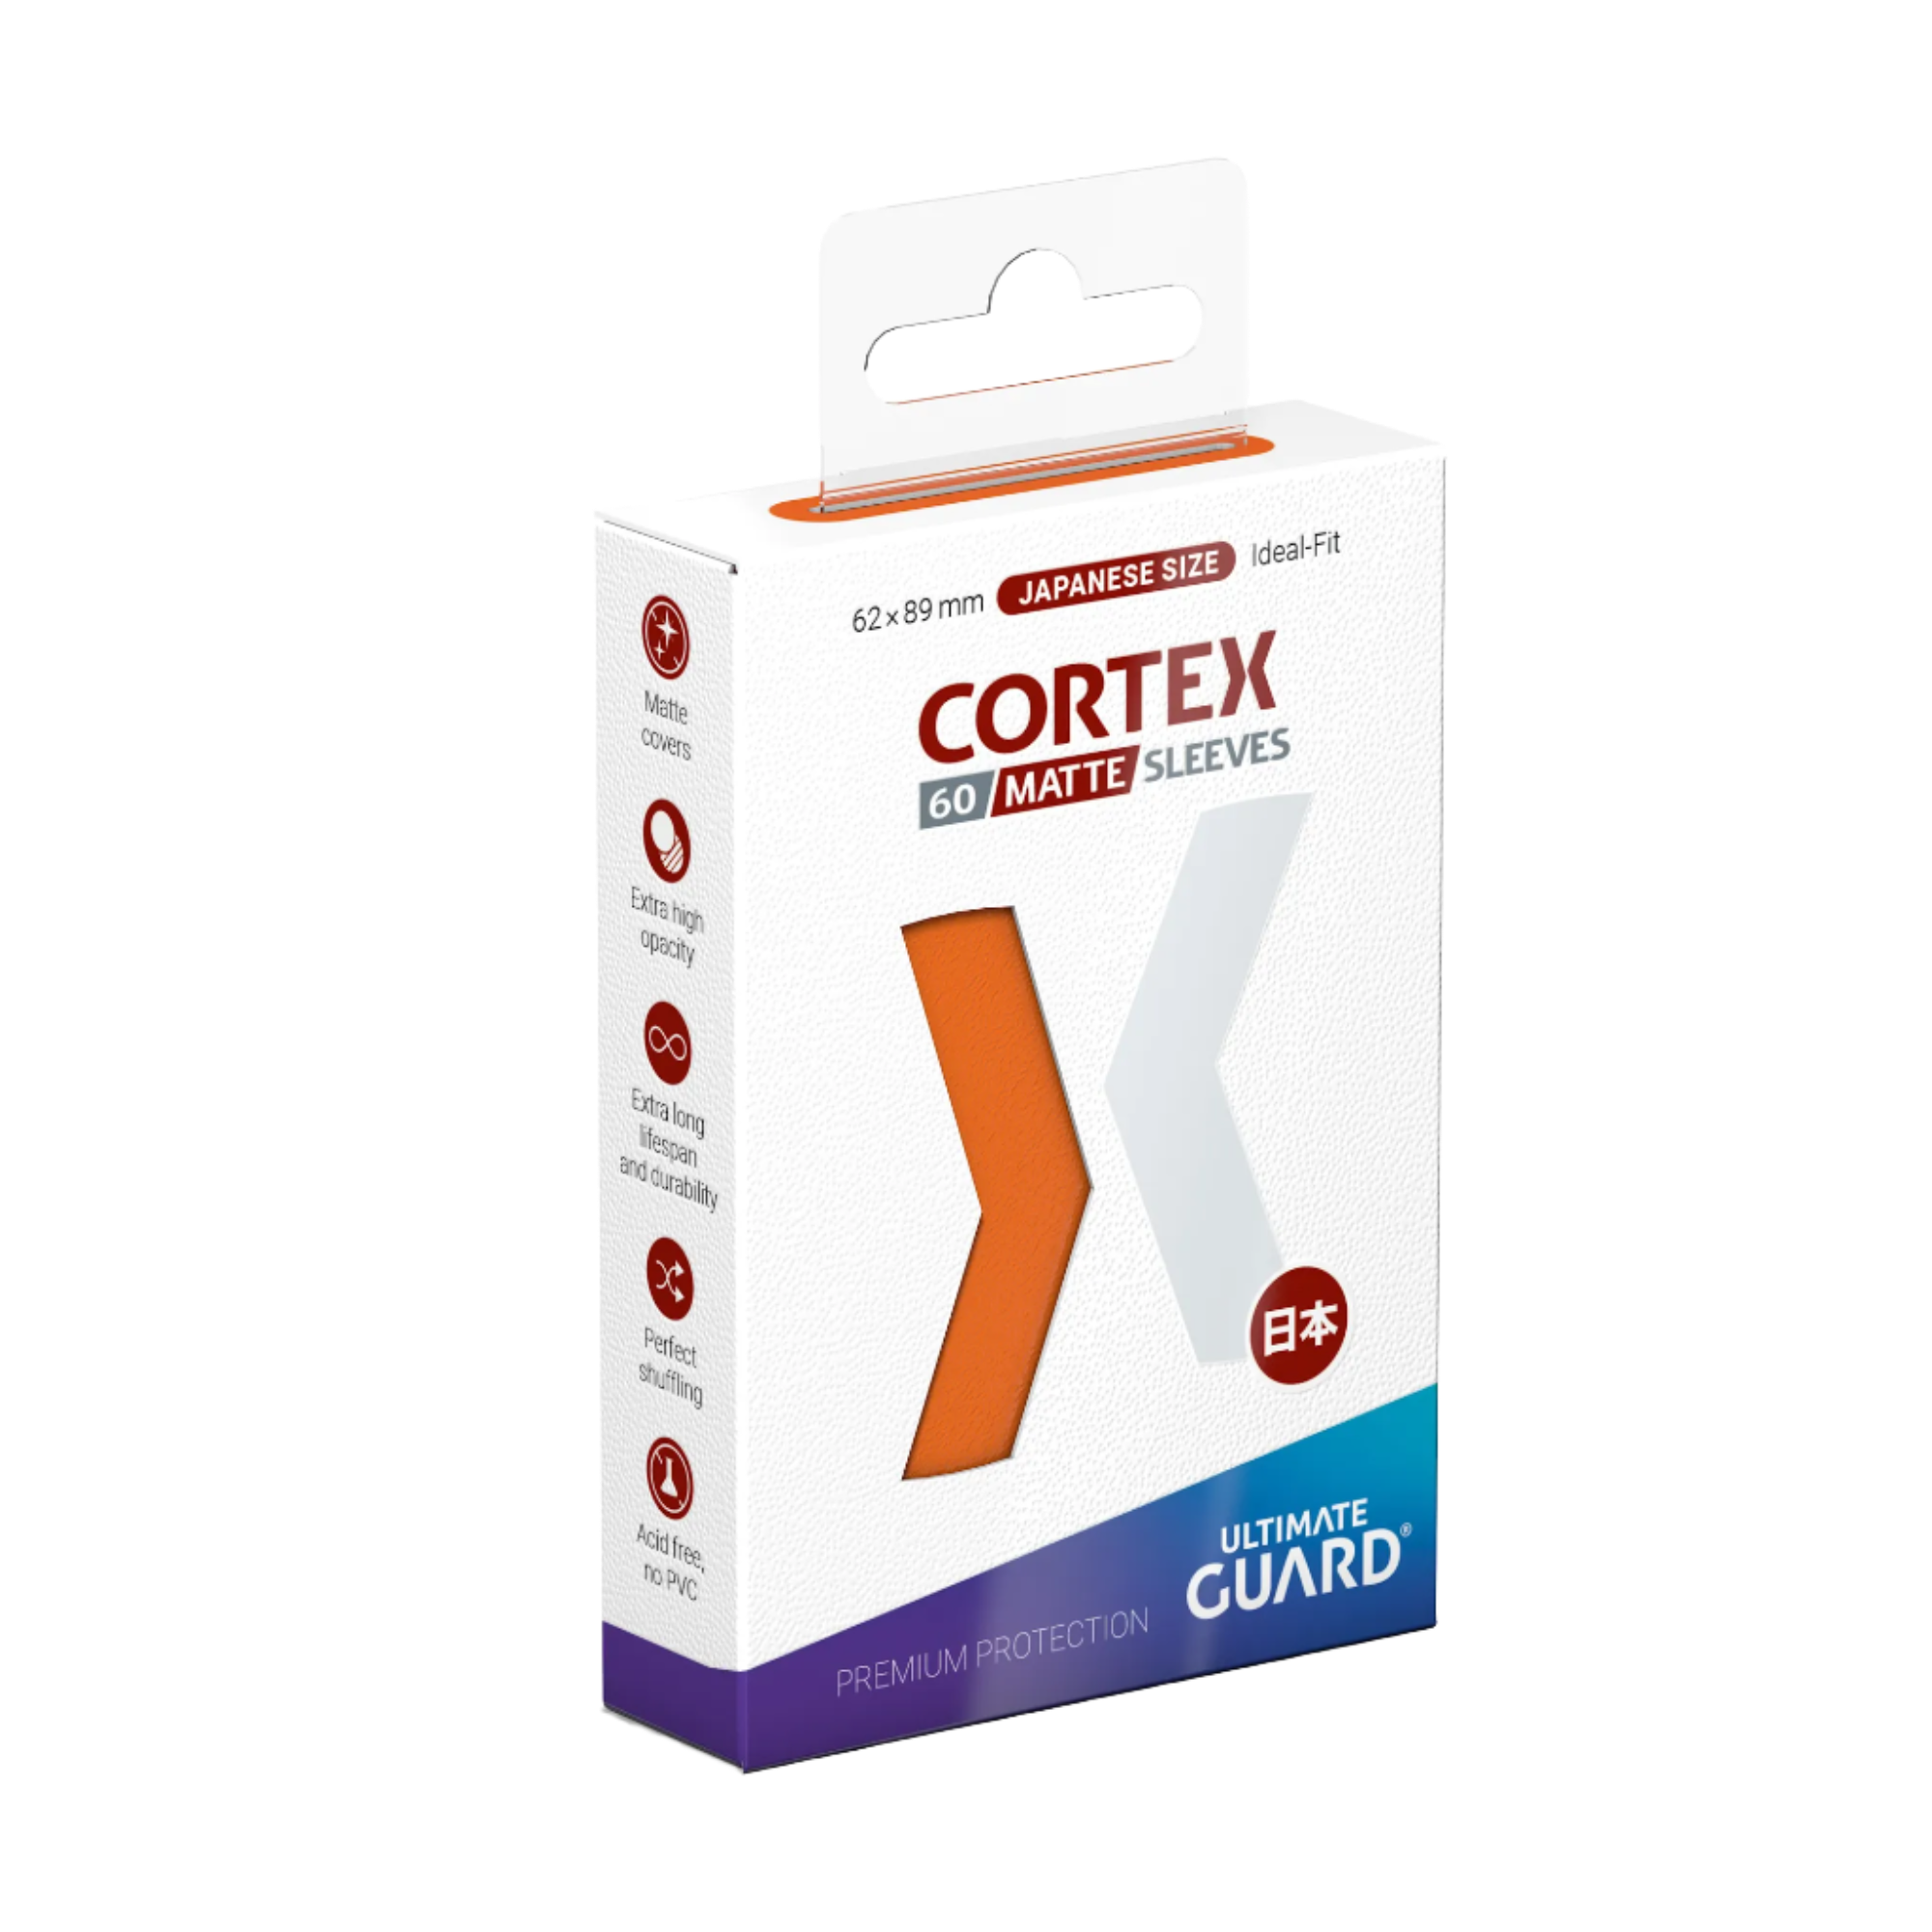 Ultimate Guard - Cortex Sleeves - Japanese Size - Ideal-Fit - Matte Orange - 60pk